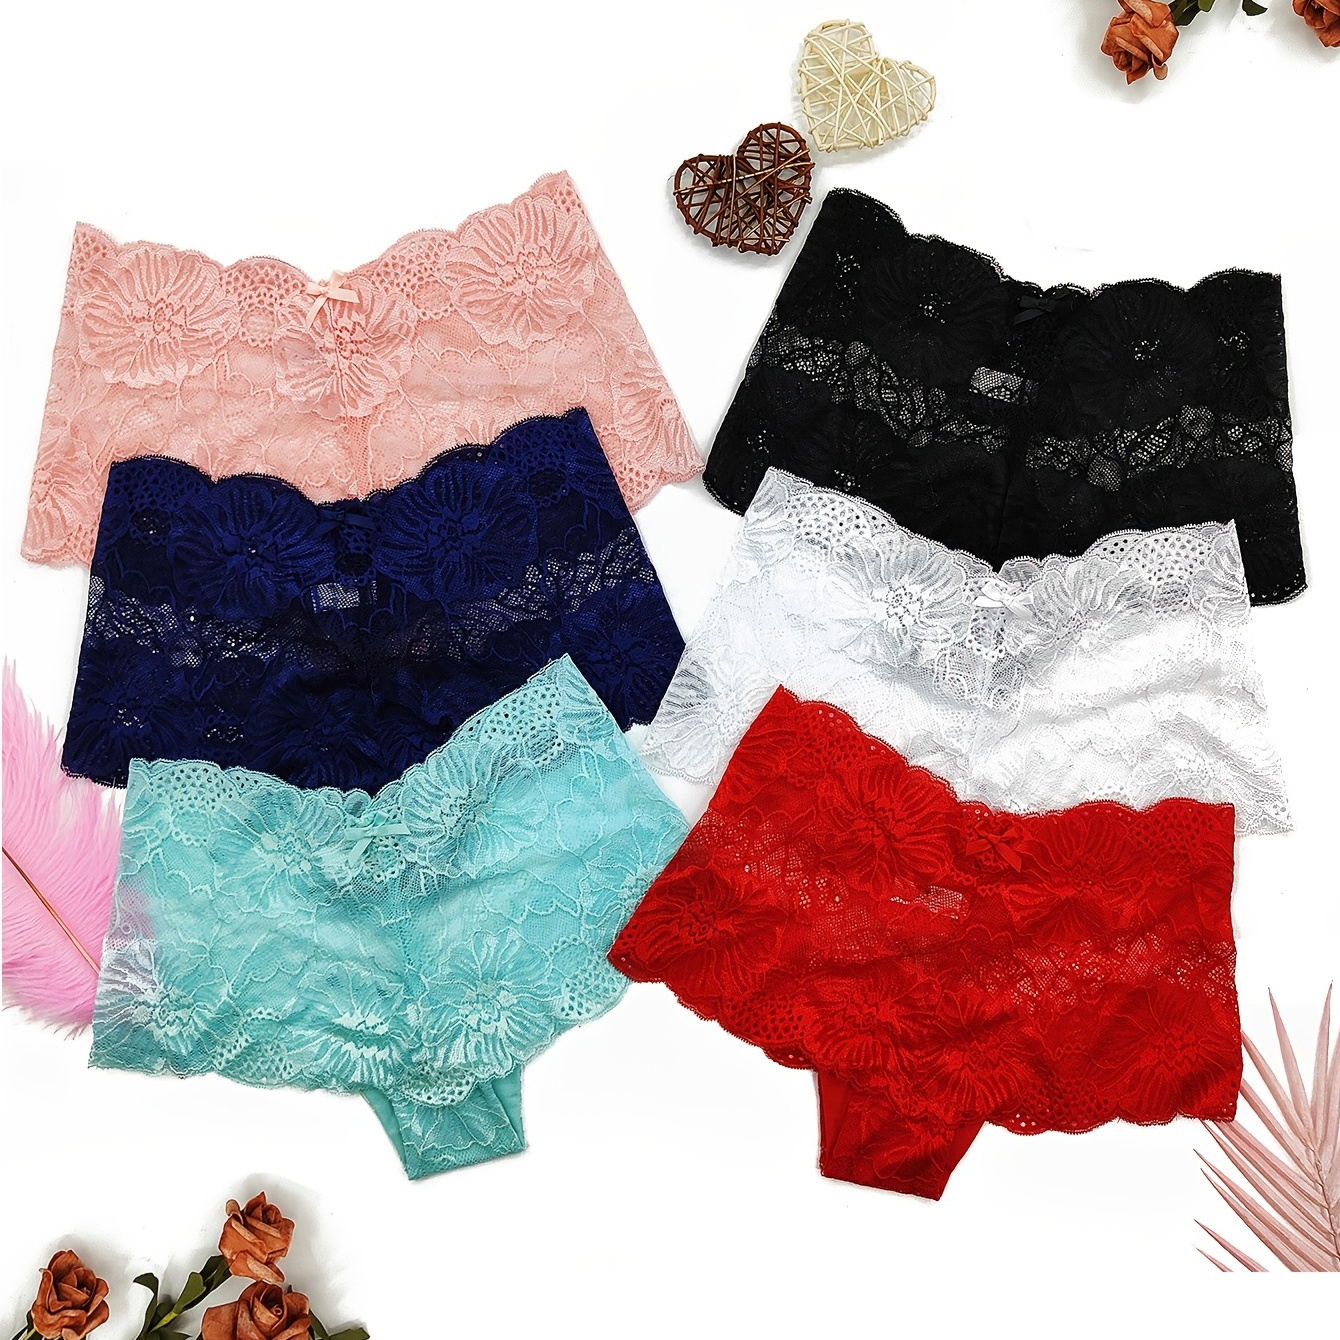 

6 Pcs Colorful Lace Thongs, Semi-sheer Floral Lace Thong Panties With Bow Tie, Women's Lingerie & Underwear